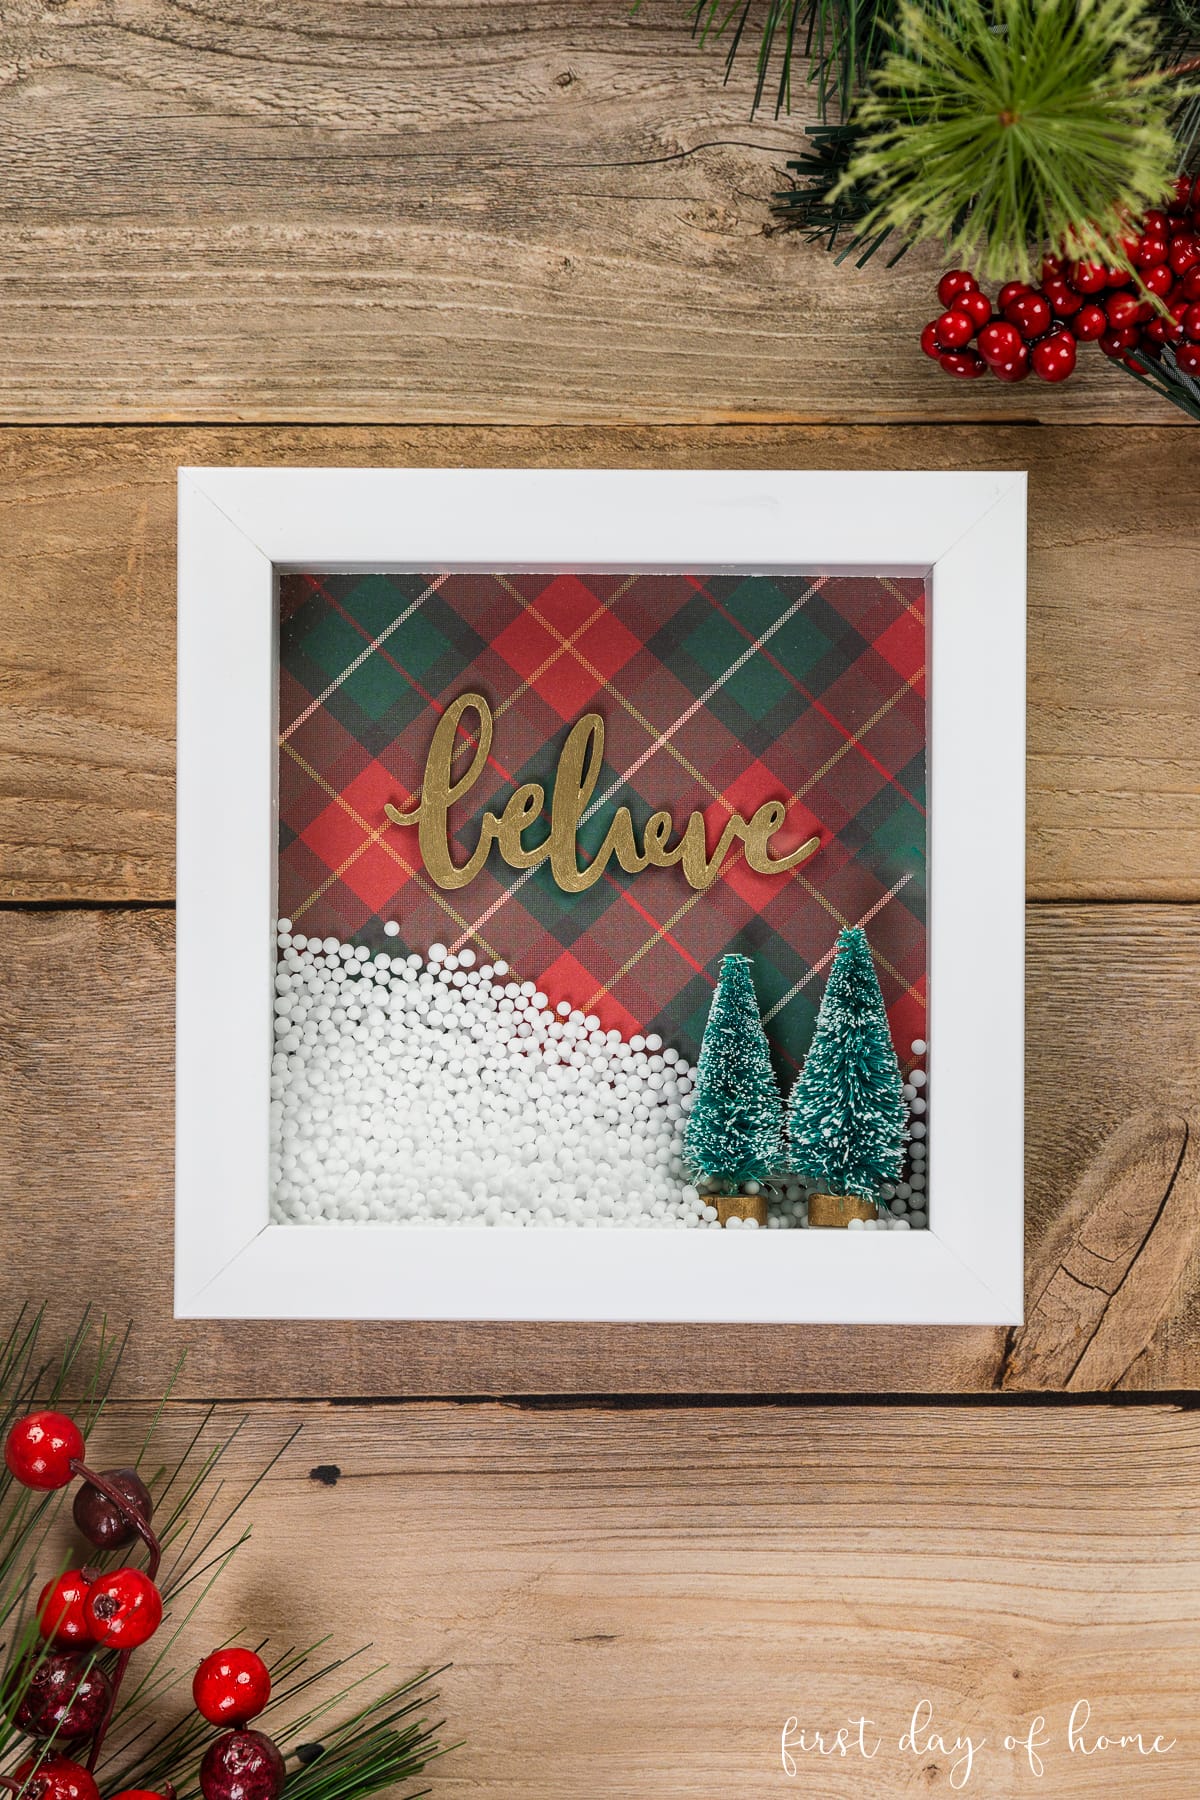 Shadow box with bottlebrush trees and faux snow and wood cutout that reads "Believe".